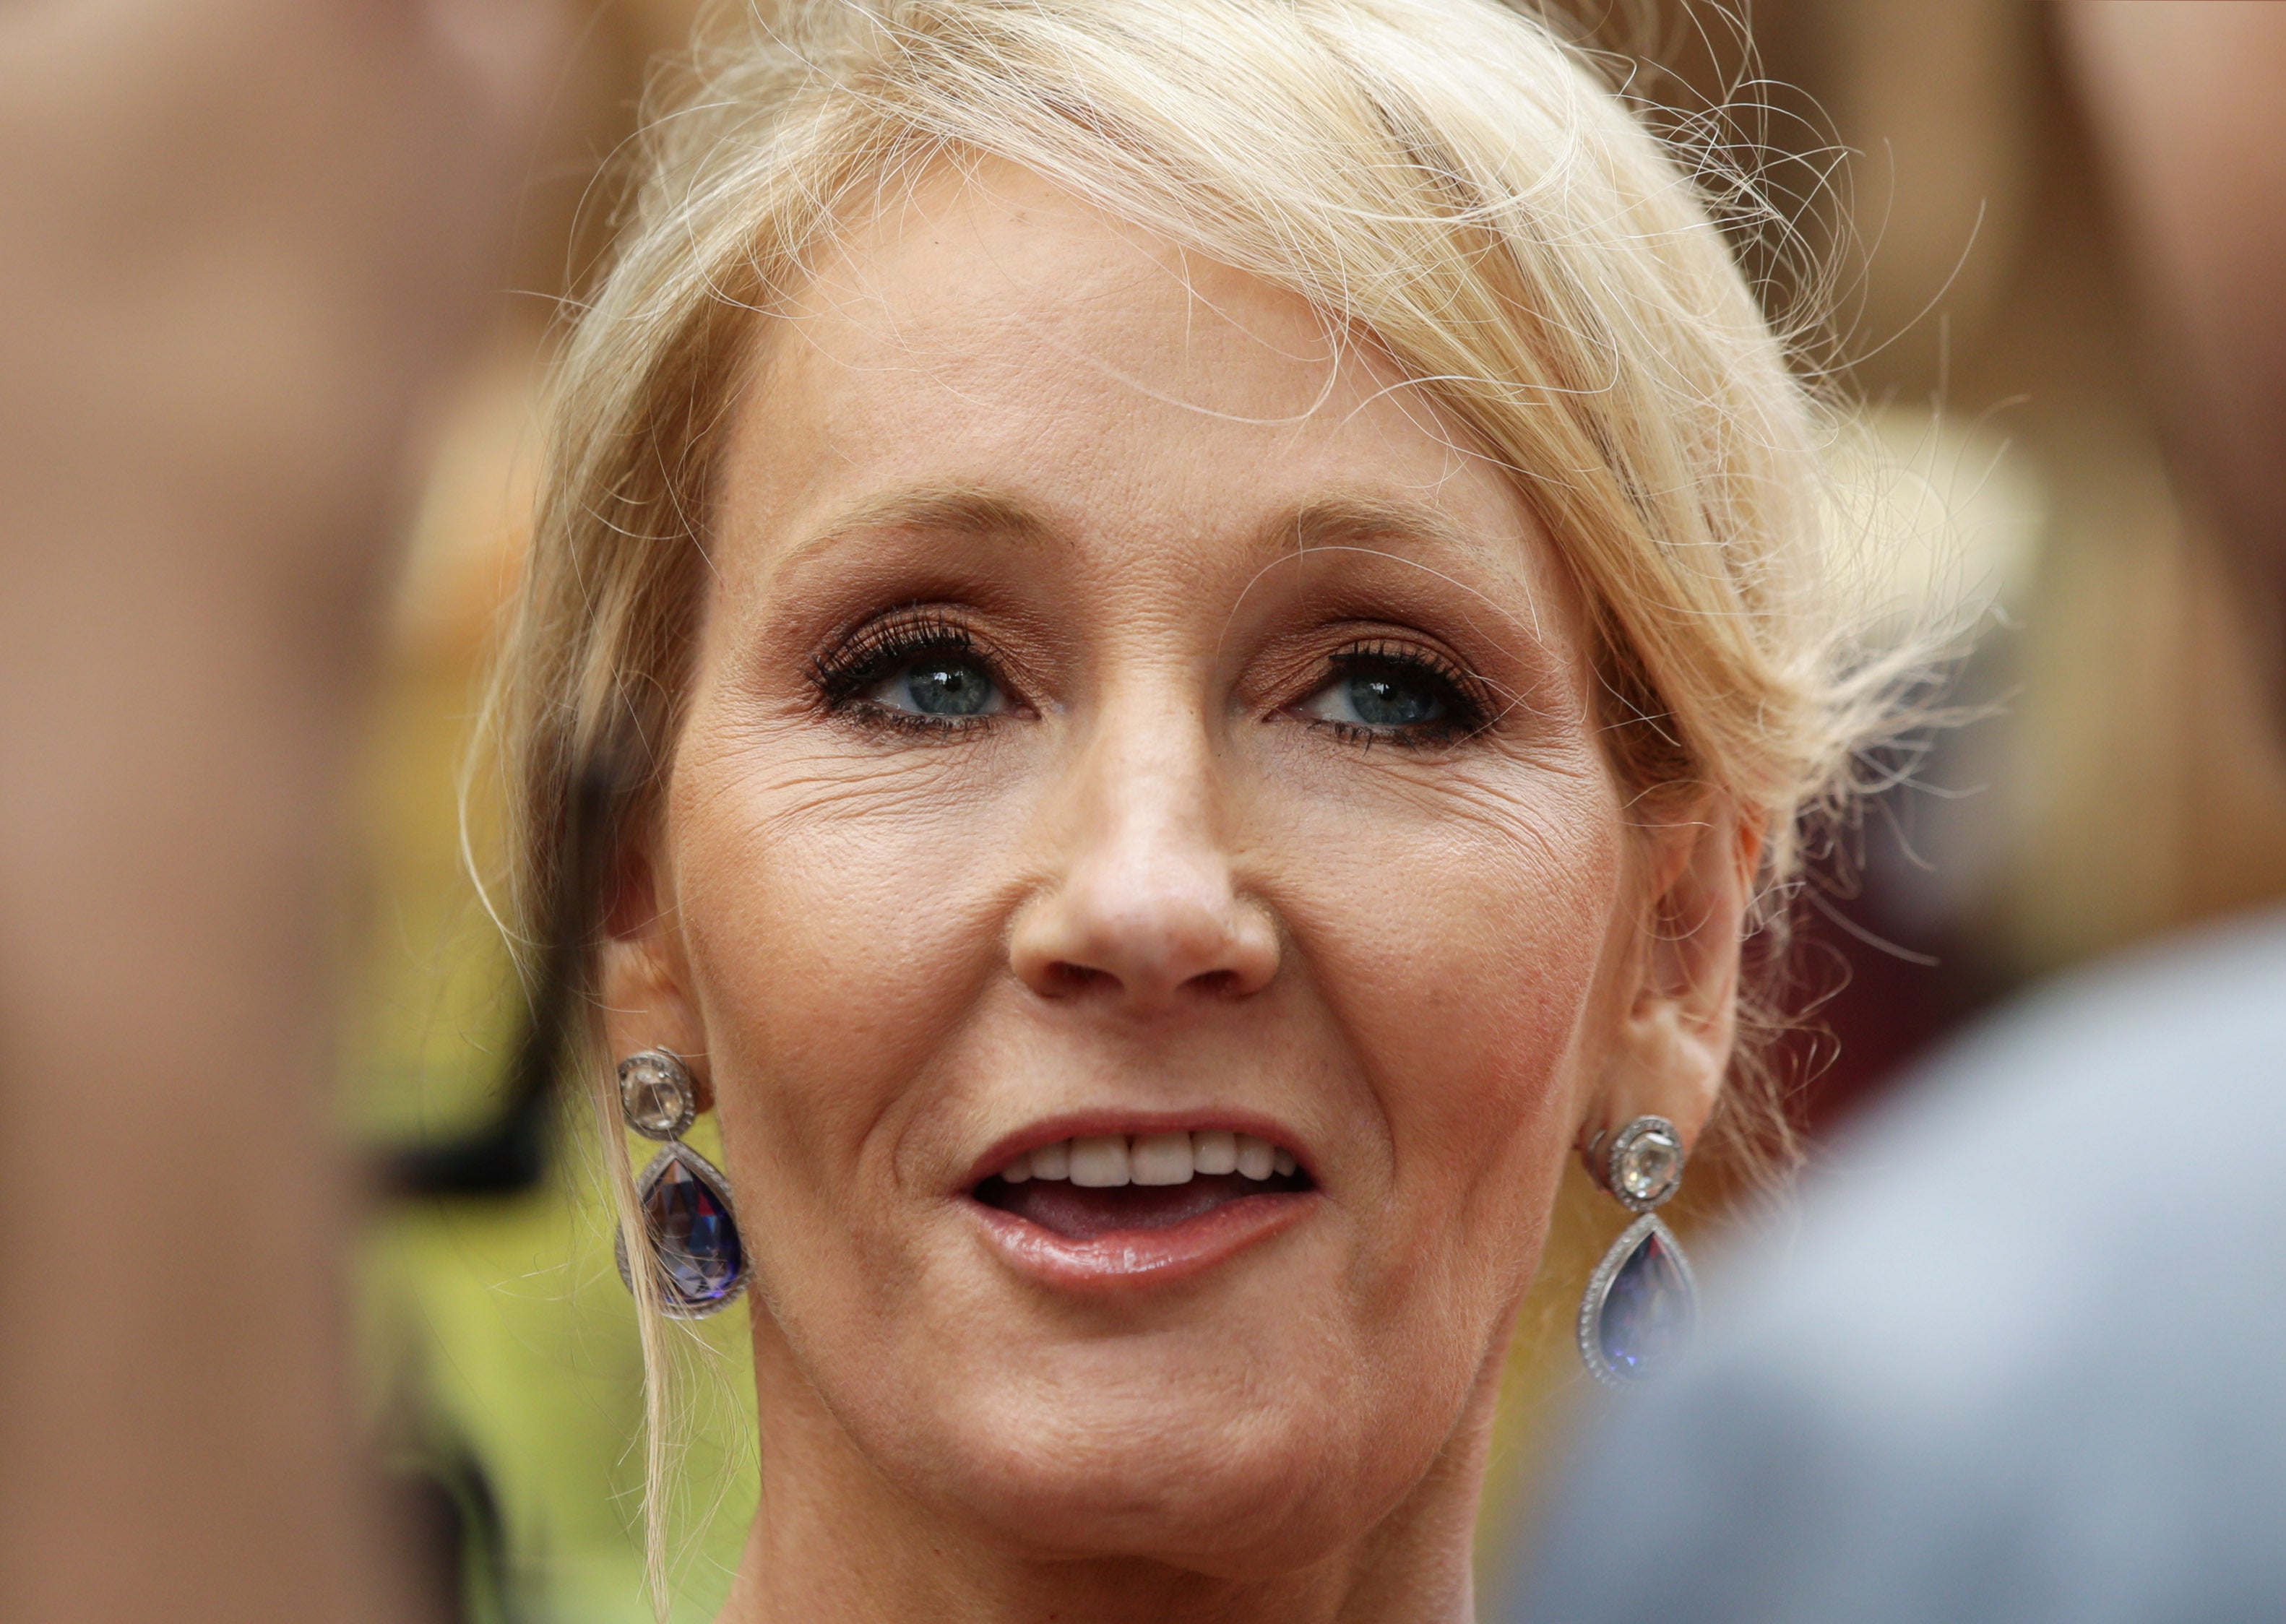 JK Rowling has made several controversial comments on gender identity